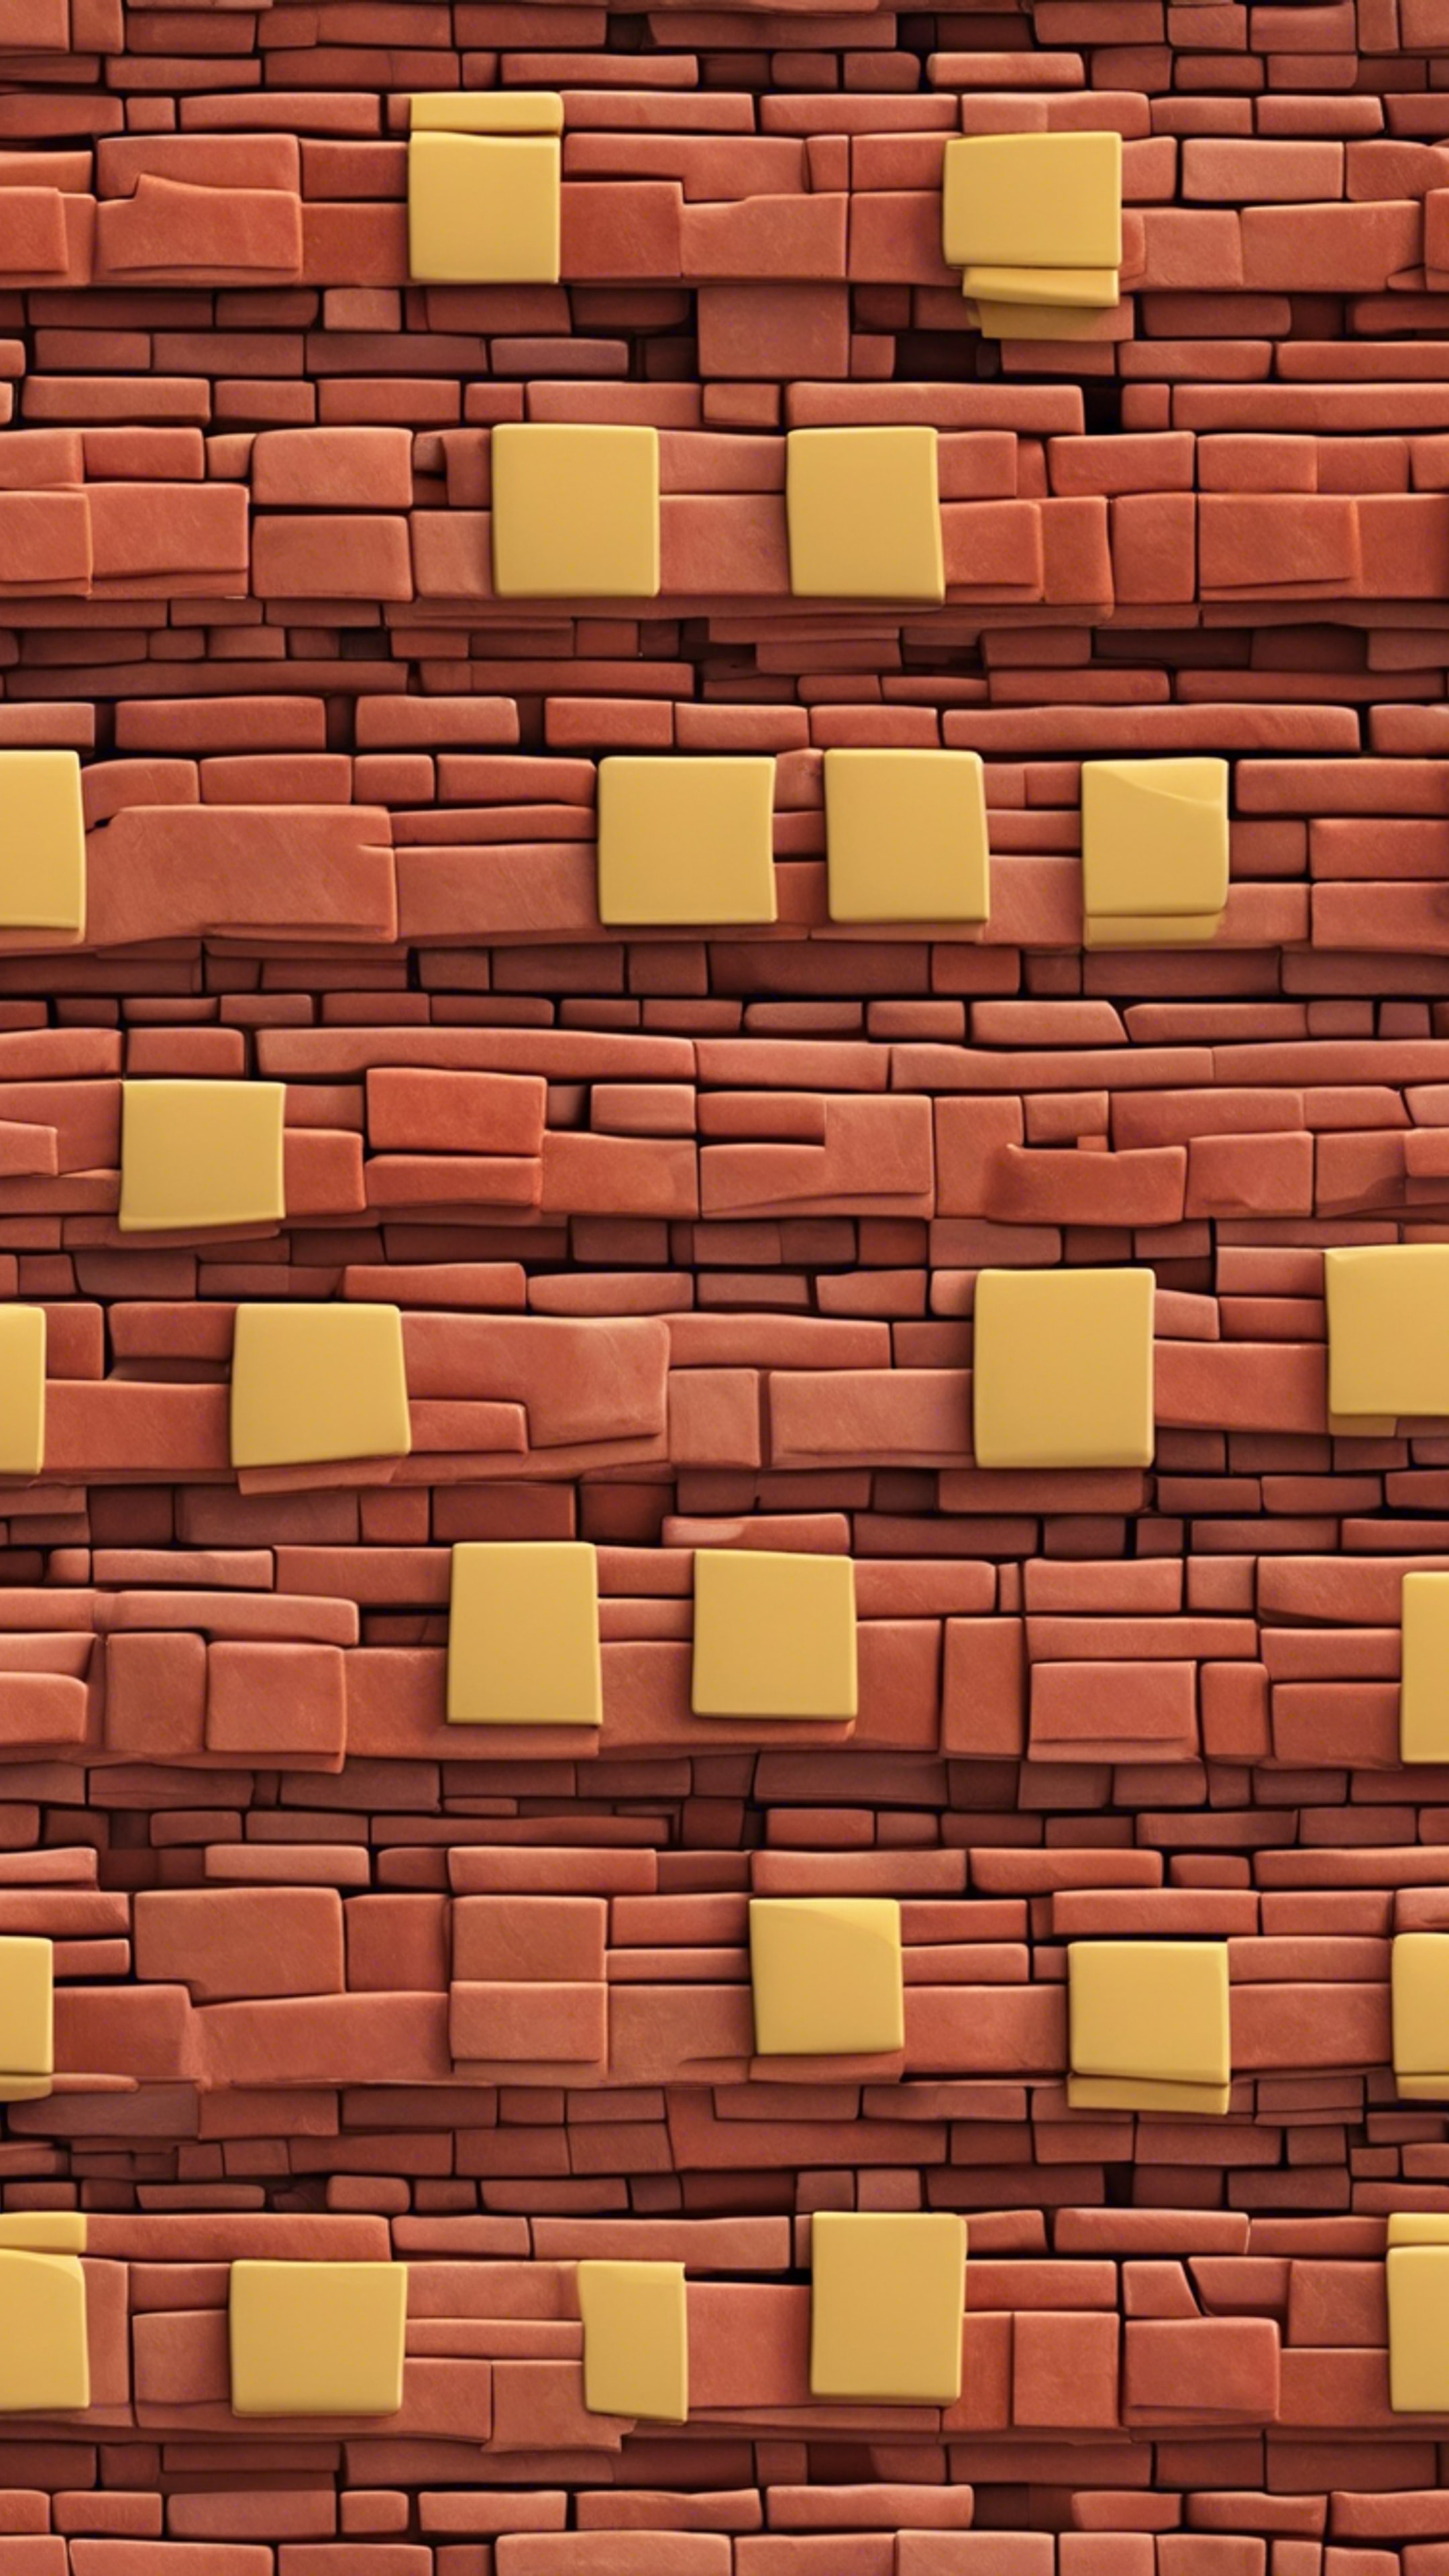 A seamless pattern of red and yellow bricks arranged in an interlocking zigzag. Тапет[44455a9799a64fc6ae31]